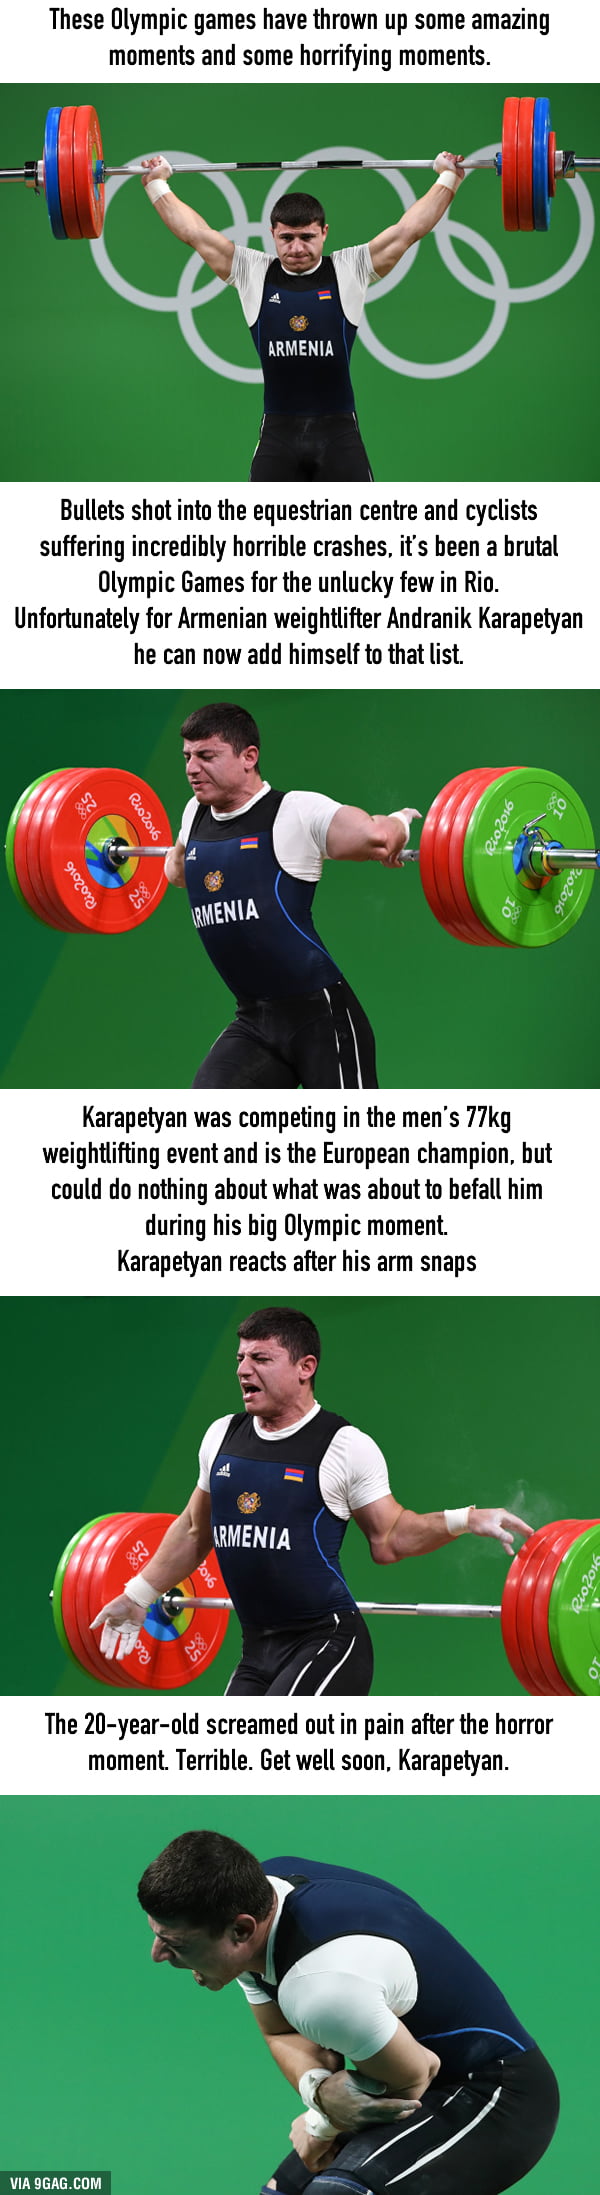 [Warning] Strong Graphic Content: Armenian Andranik Karapetyan weightlifter’s arm snaps during Rio Olympic Games